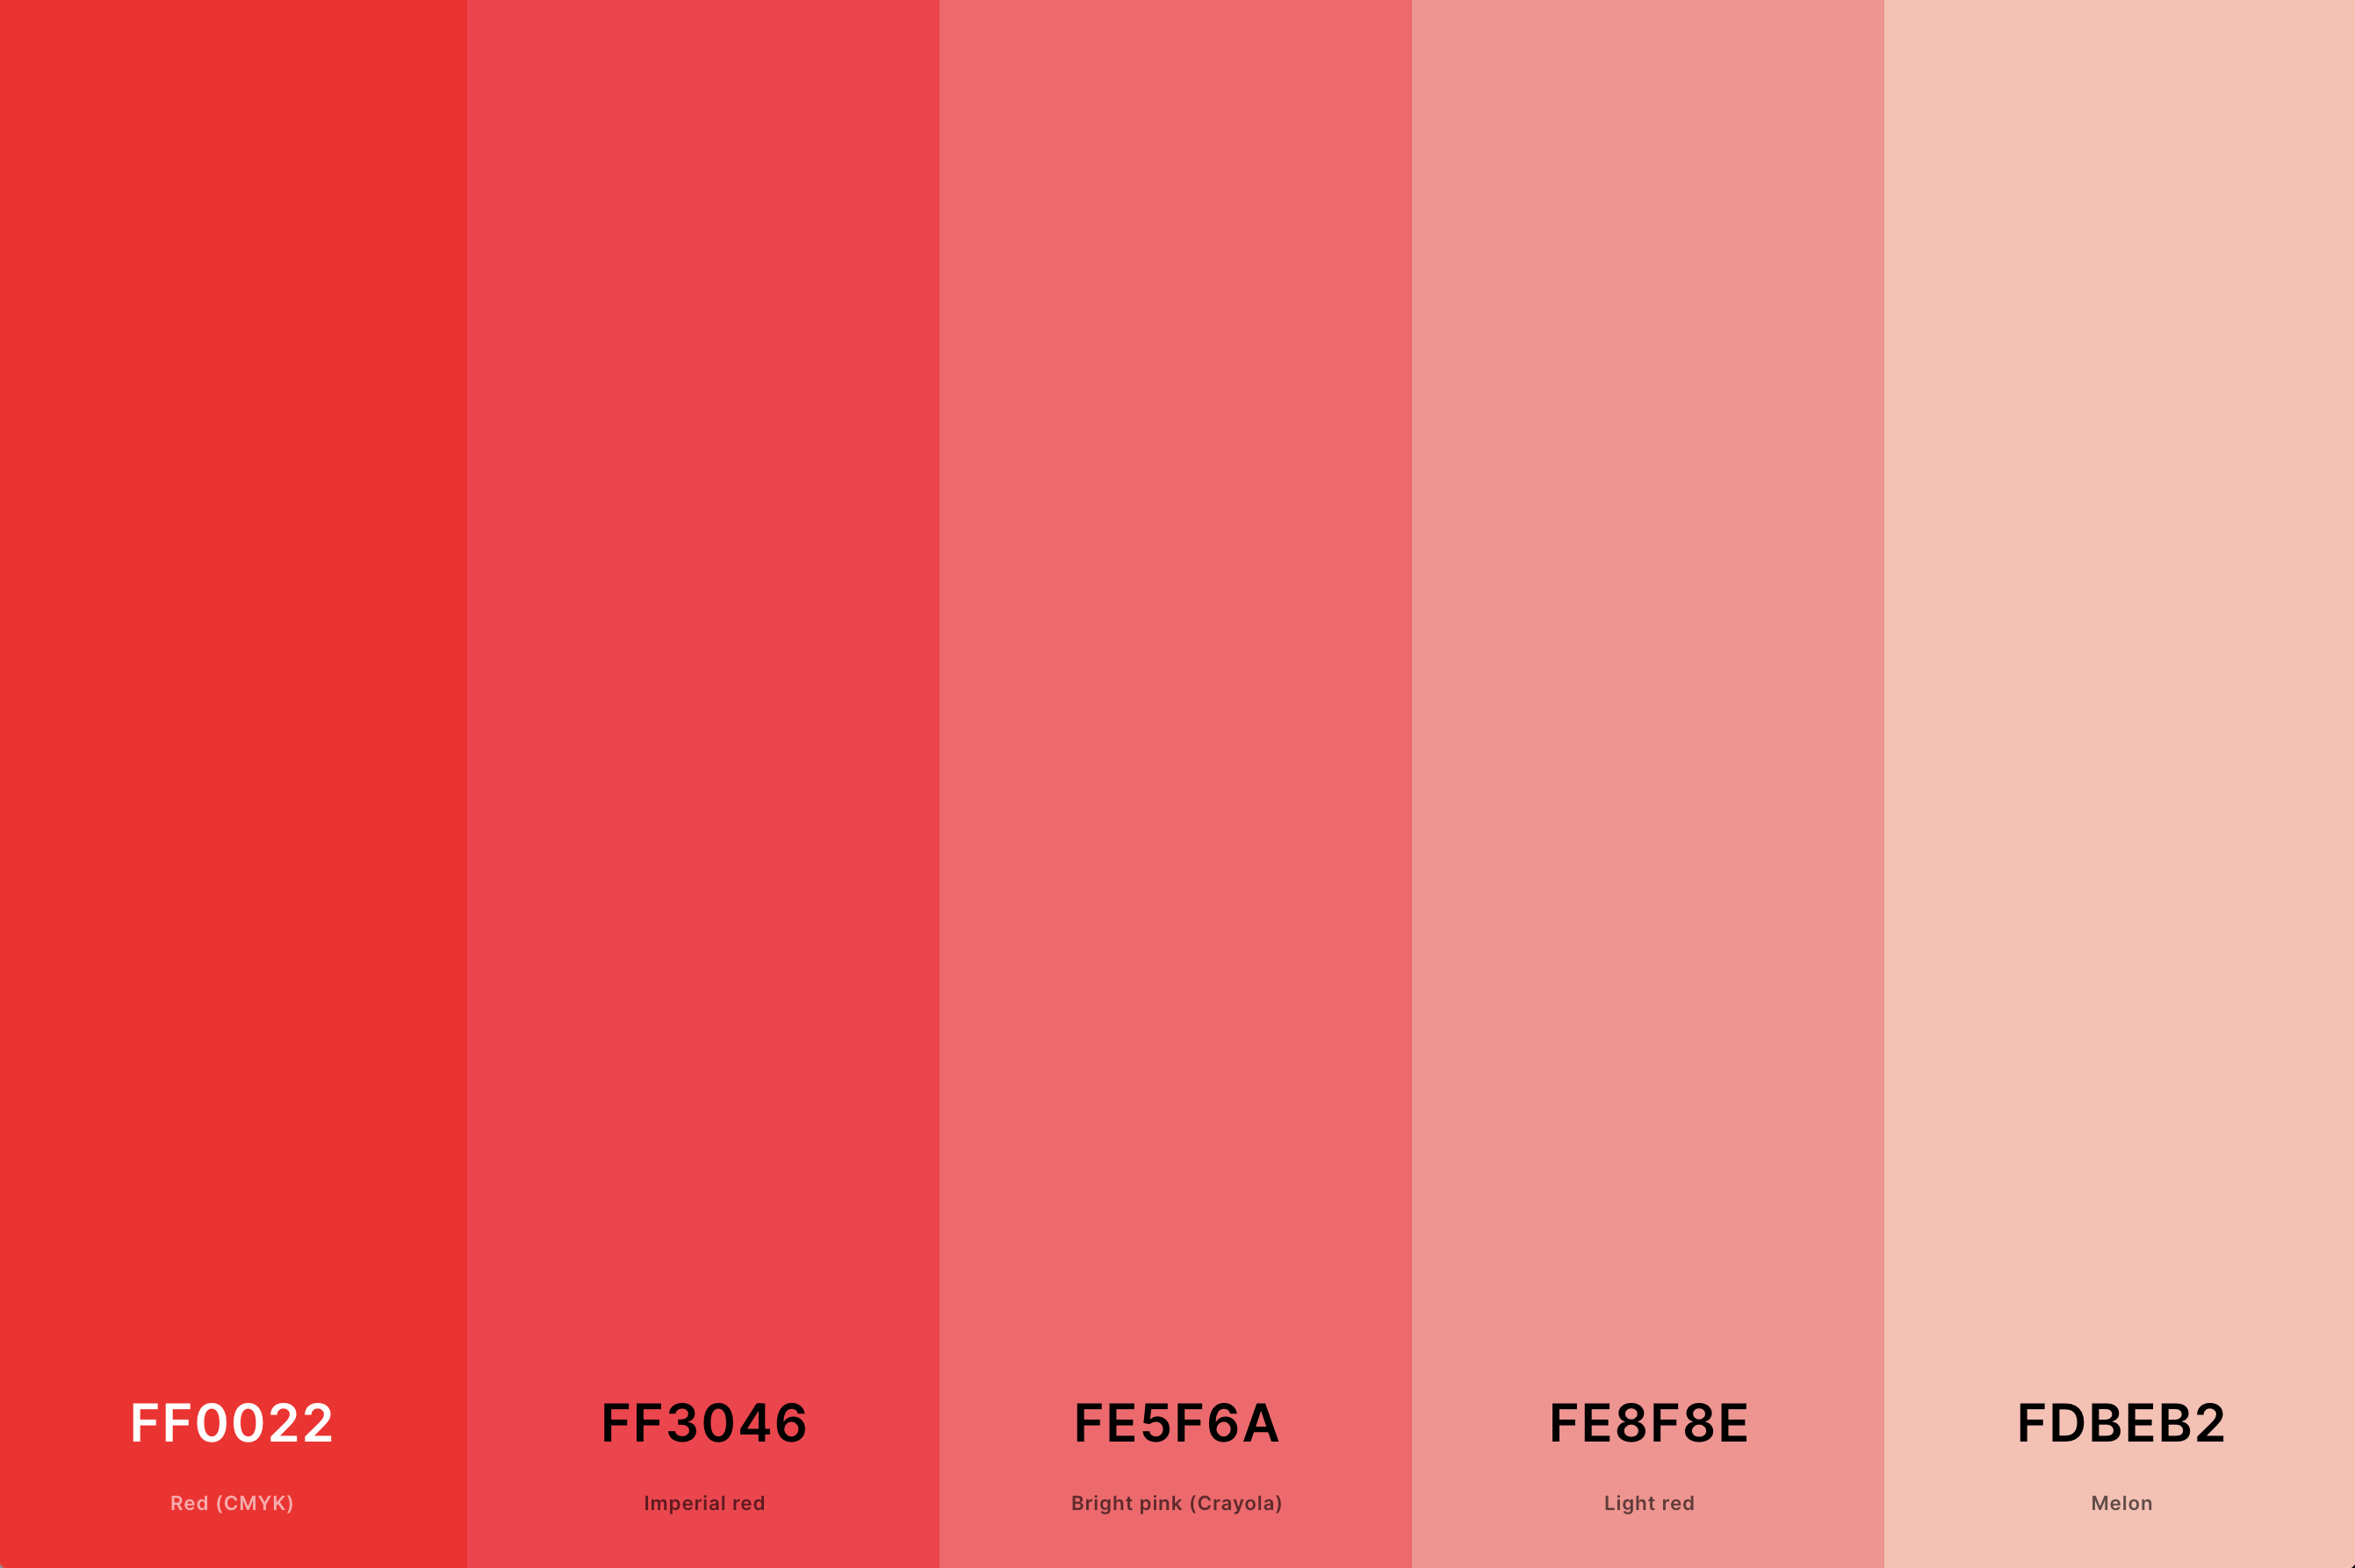 12. Red And Pink Color Palette Color Palette with Red (Cmyk) (Hex #FF0022) + Imperial Red (Hex #FF3046) + Bright Pink (Crayola) (Hex #FE5F6A) + Light Red (Hex #FE8F8E) + Melon (Hex #FDBEB2) Color Palette with Hex Codes